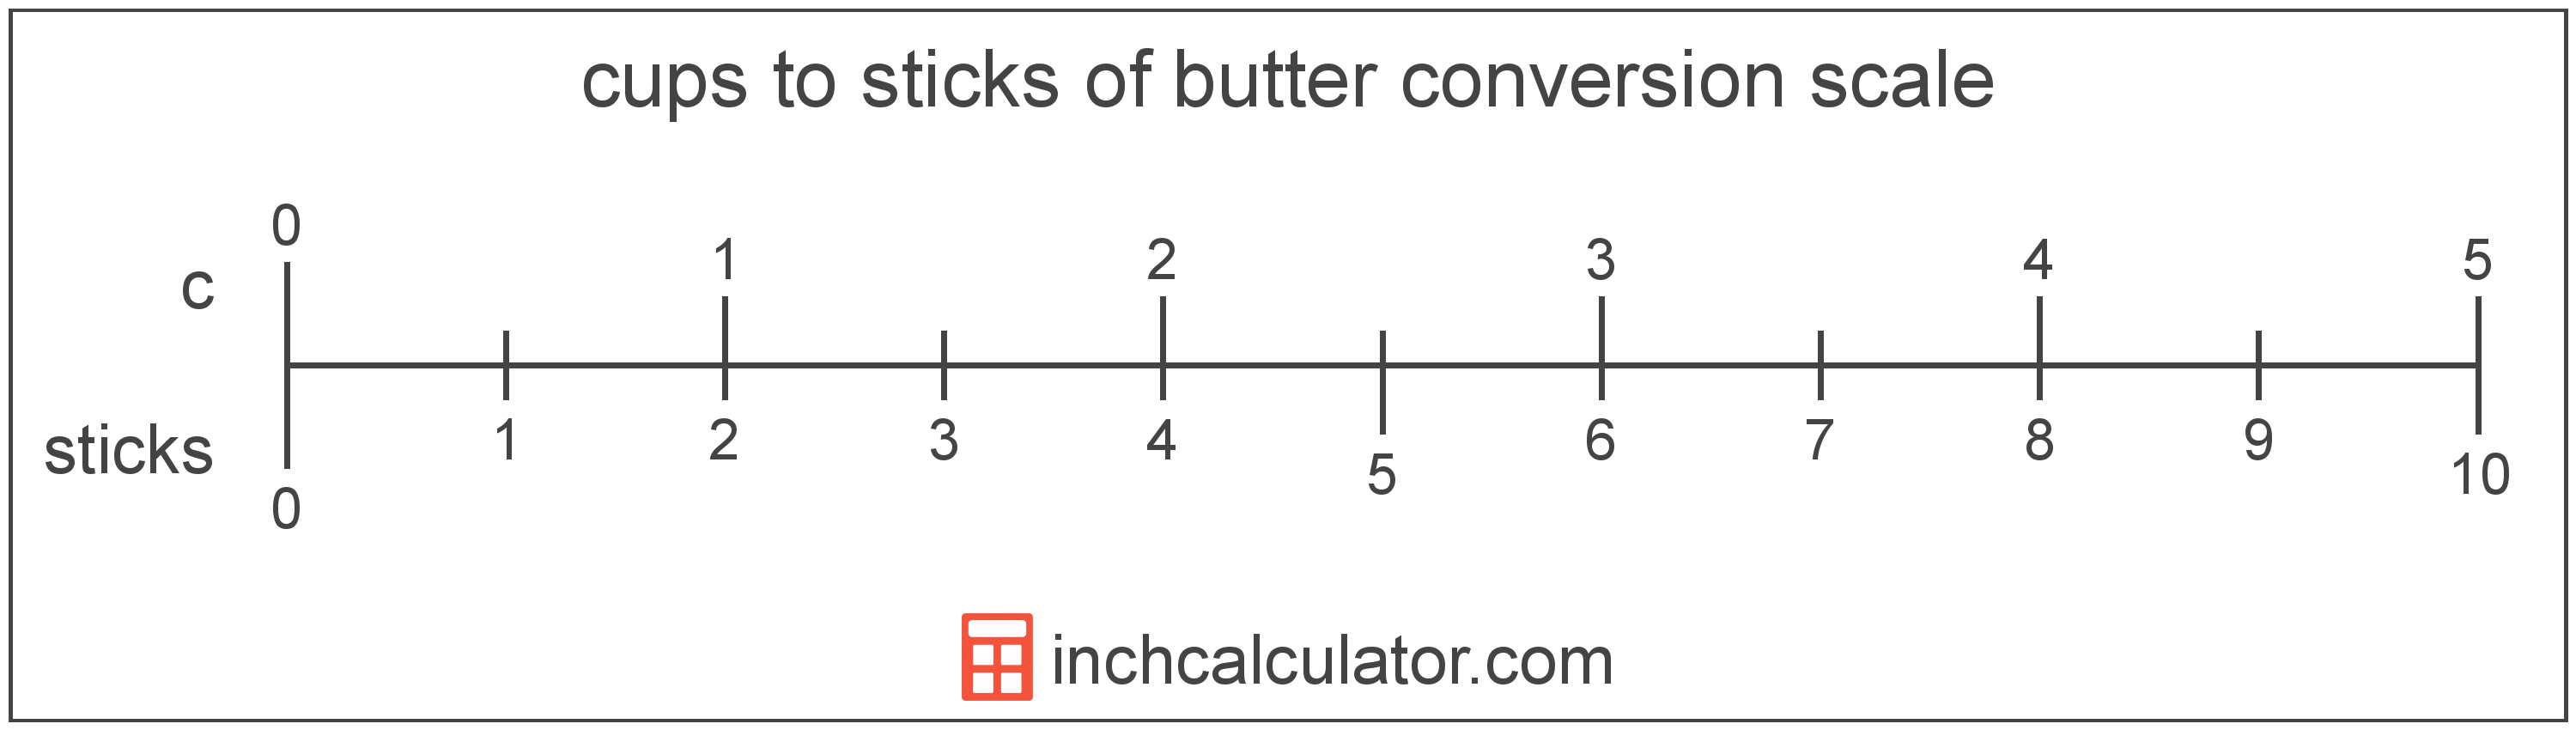 conversion scale showing cups and equivalent sticks of butter butter values